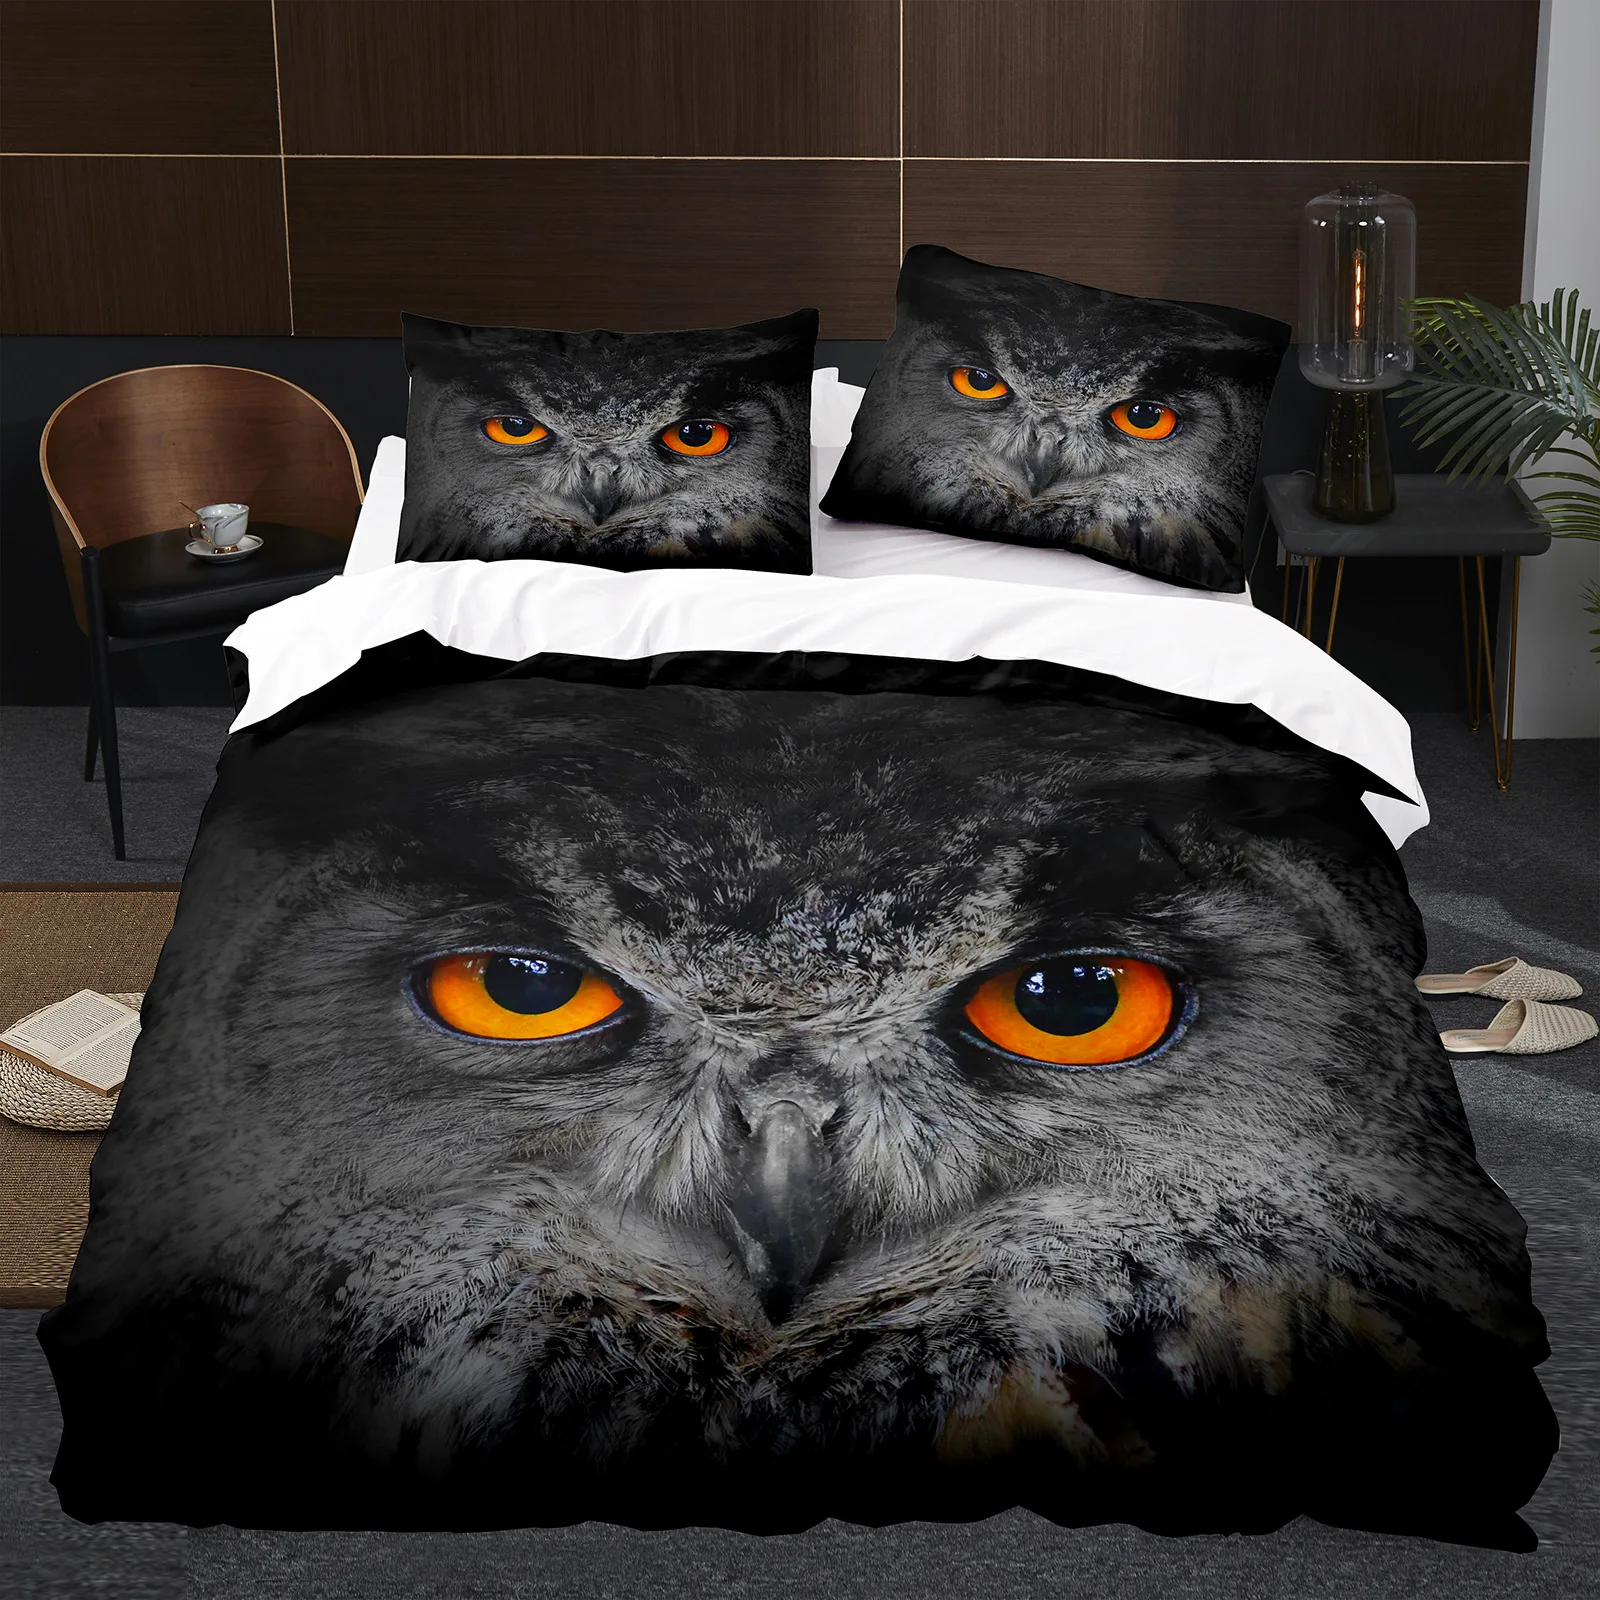 

Owl Duvet Cover Set 3D Safari Wildlife Print Comforter Cover Bird Animal Personalized Nighthawk Queen Size Polyester Quilt Cover